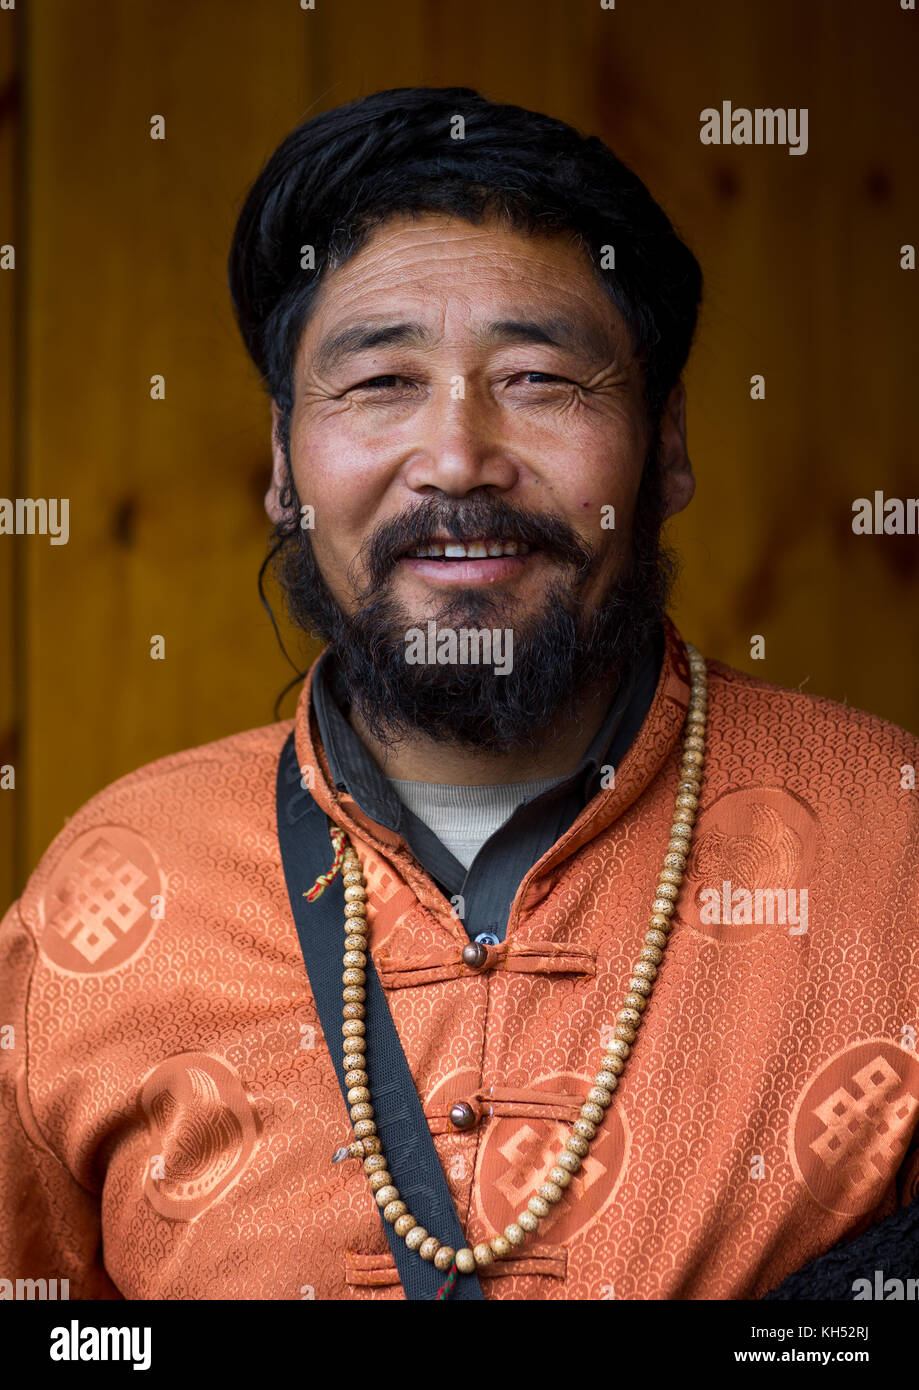 Portrait of a nyingma tibetan nomad man during a pilgrimage in Labrang monastery, Gansu province, Labrang, China Stock Photo